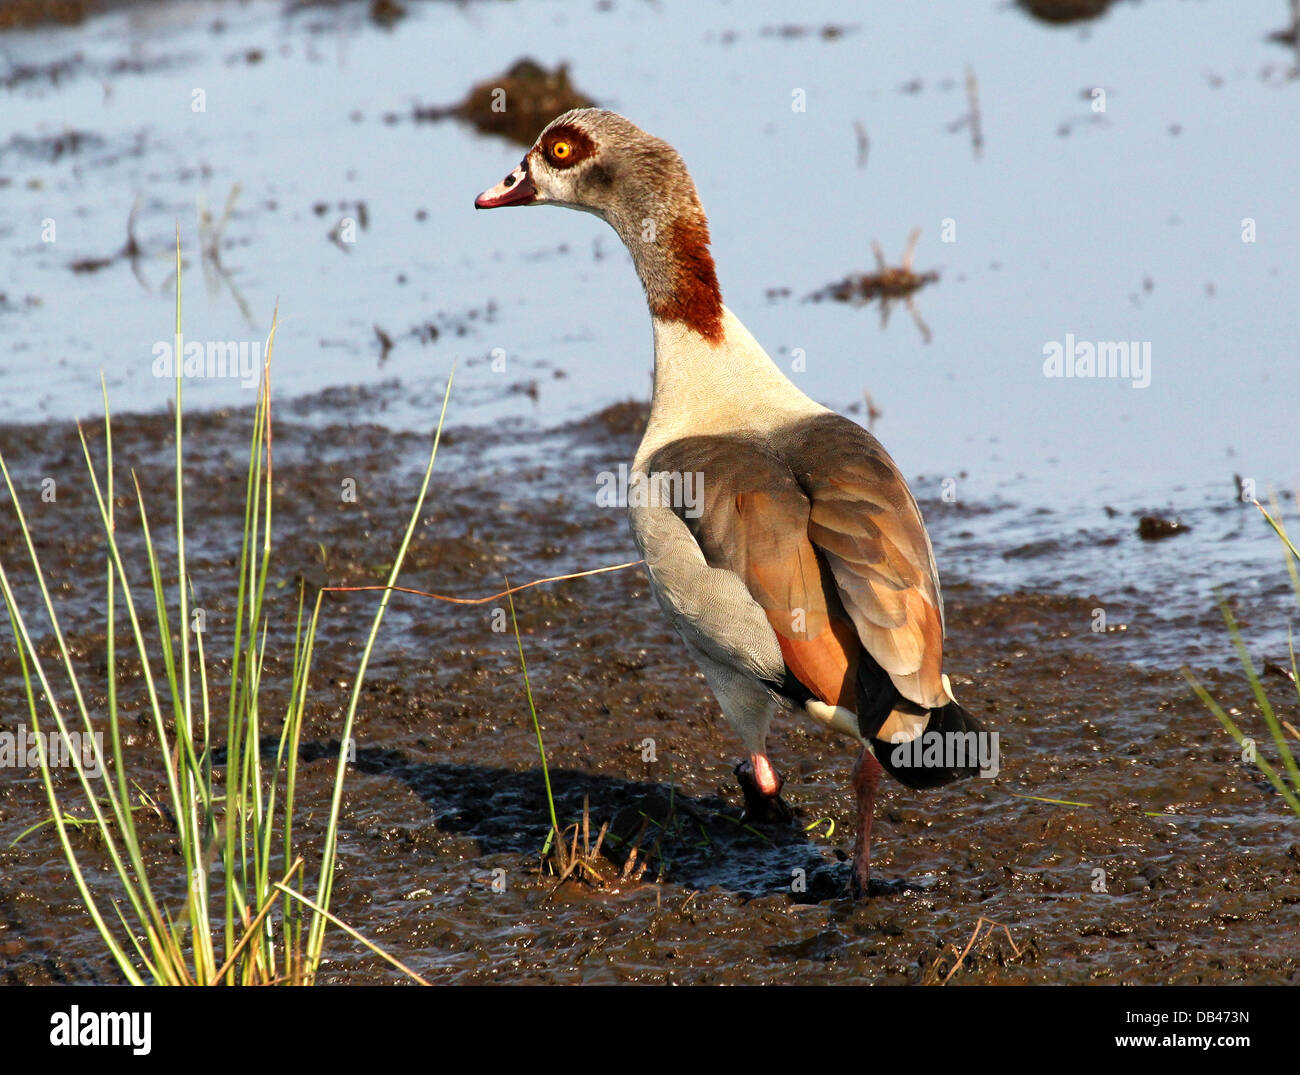 Egyptian Goose( Alopochen aegyptiaca) walking in wetlands with reflection Stock Photo